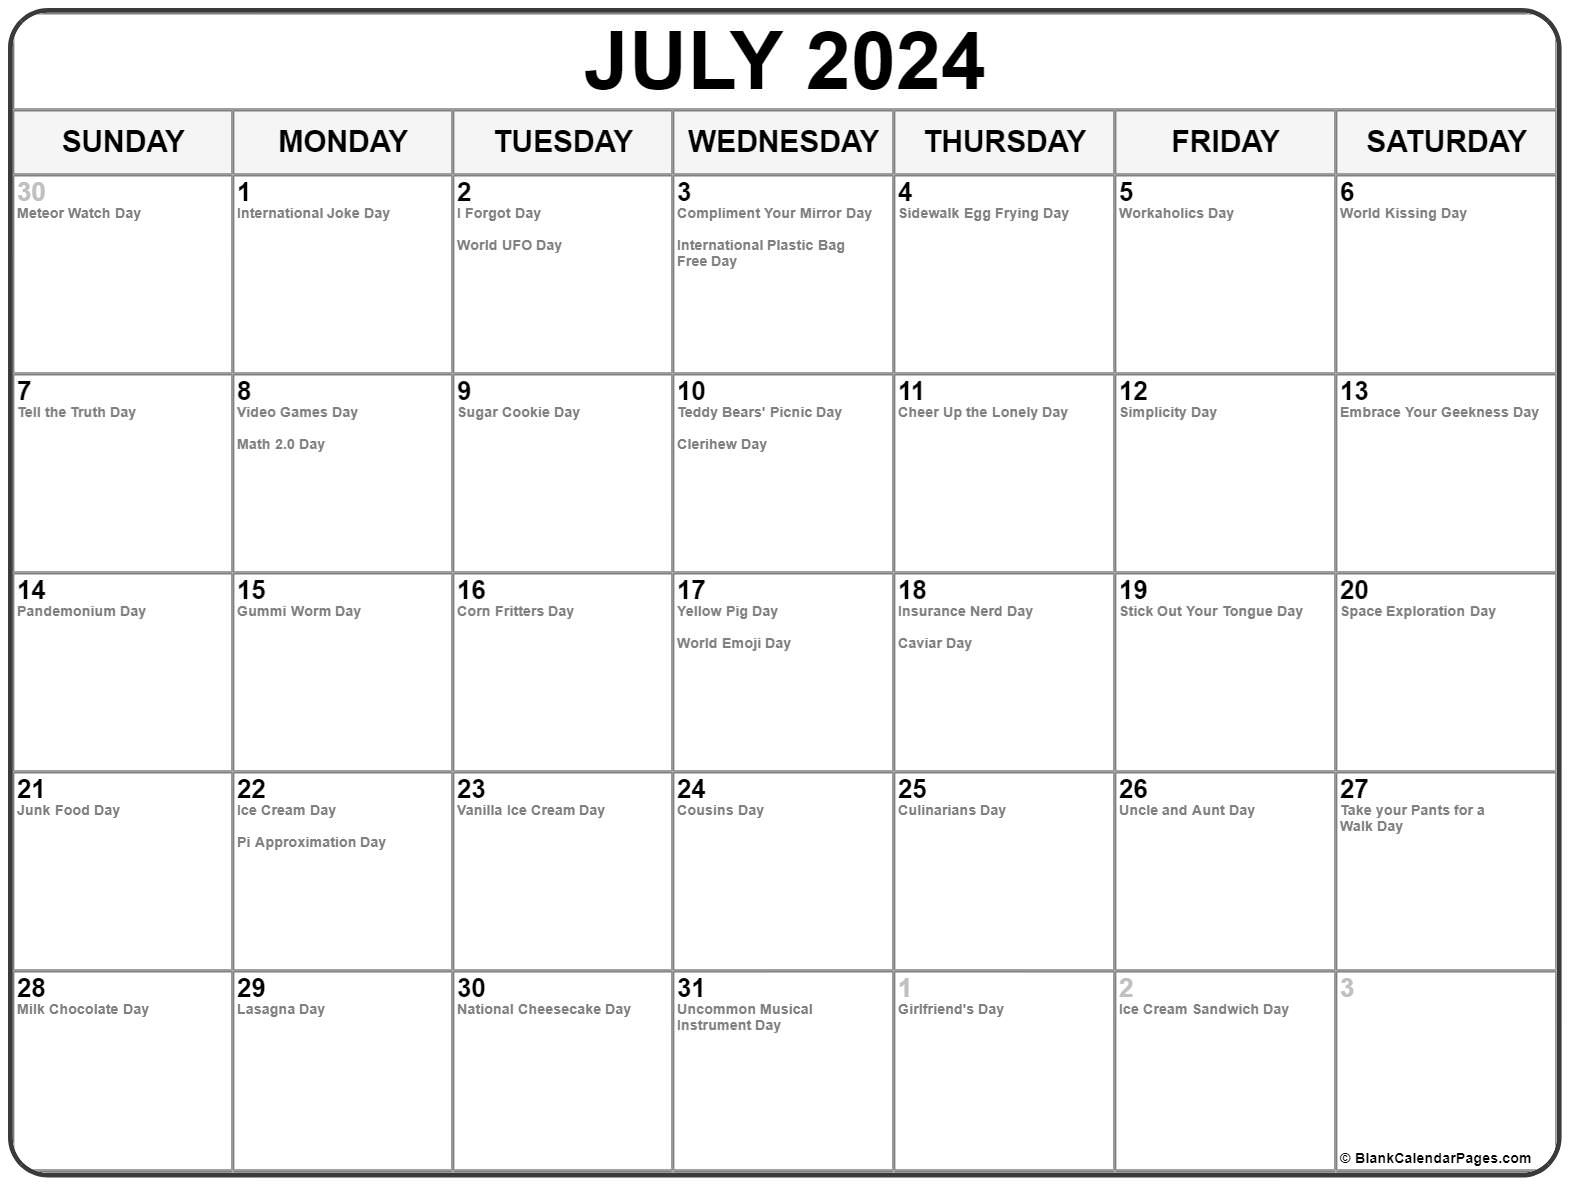 July 2024 With Holidays Calendar for National Calendar July 2024